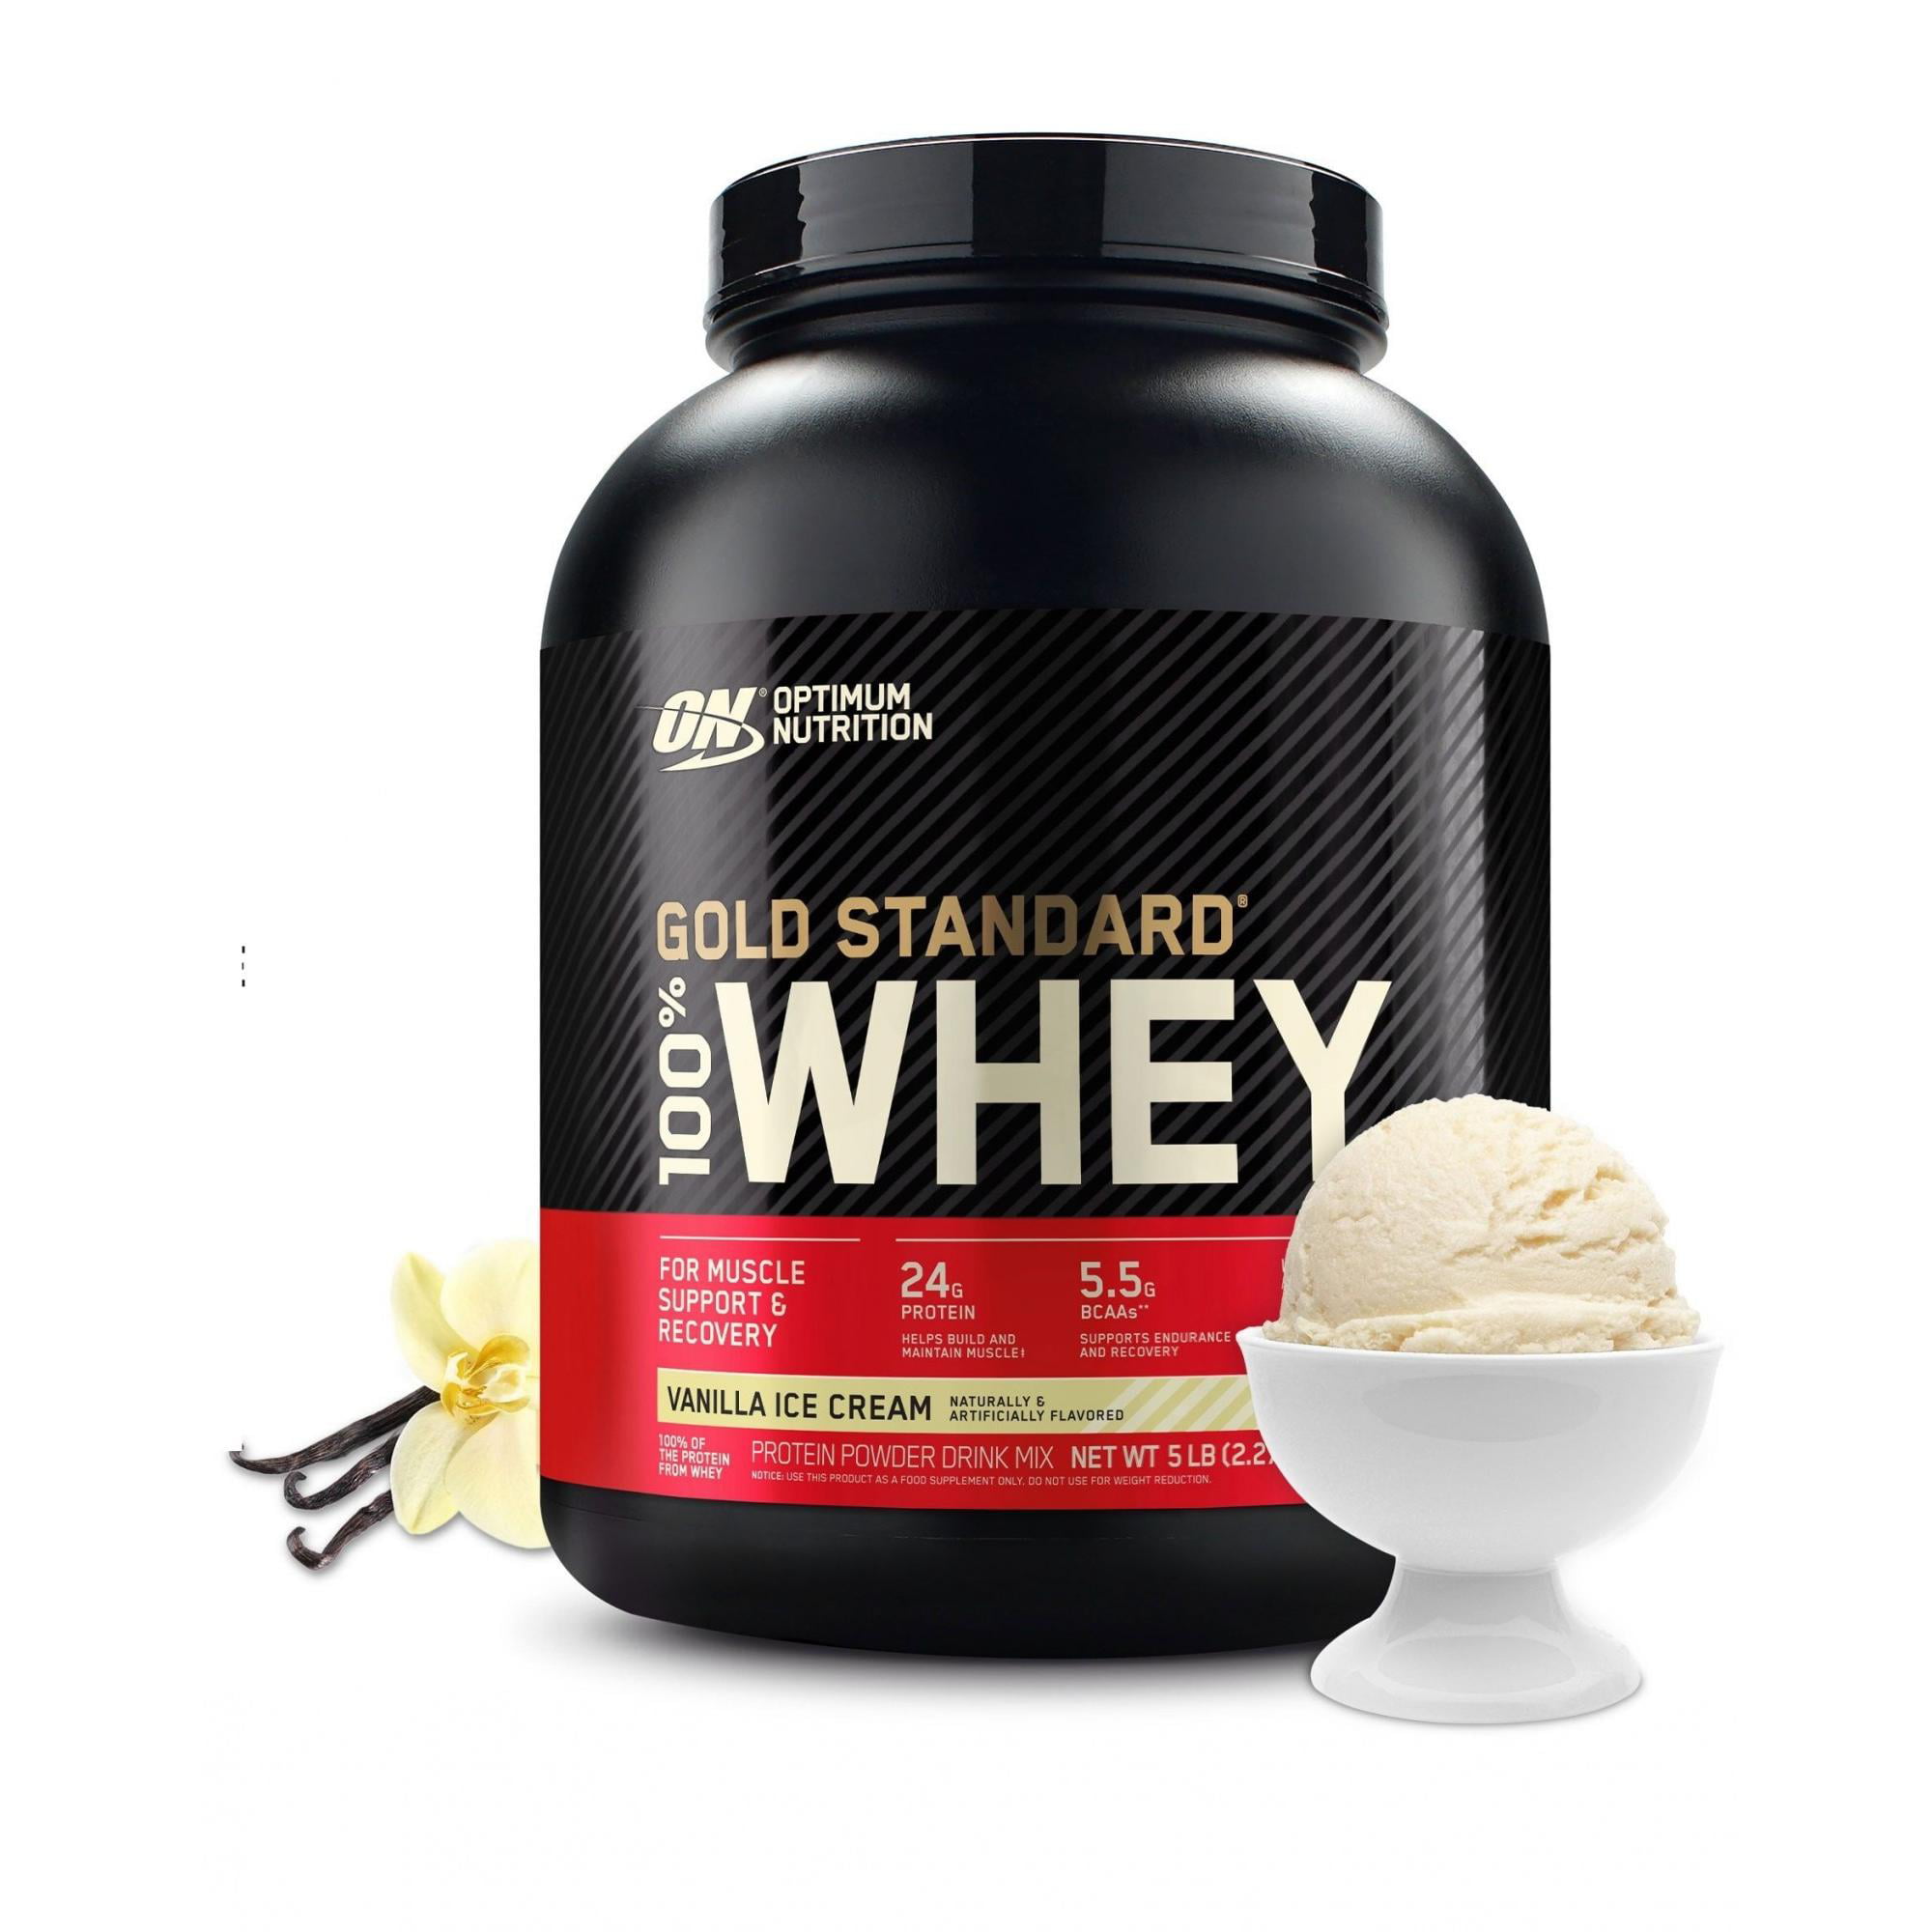 How to Incorporate Whey Protein Powder into Your Fitness Routine